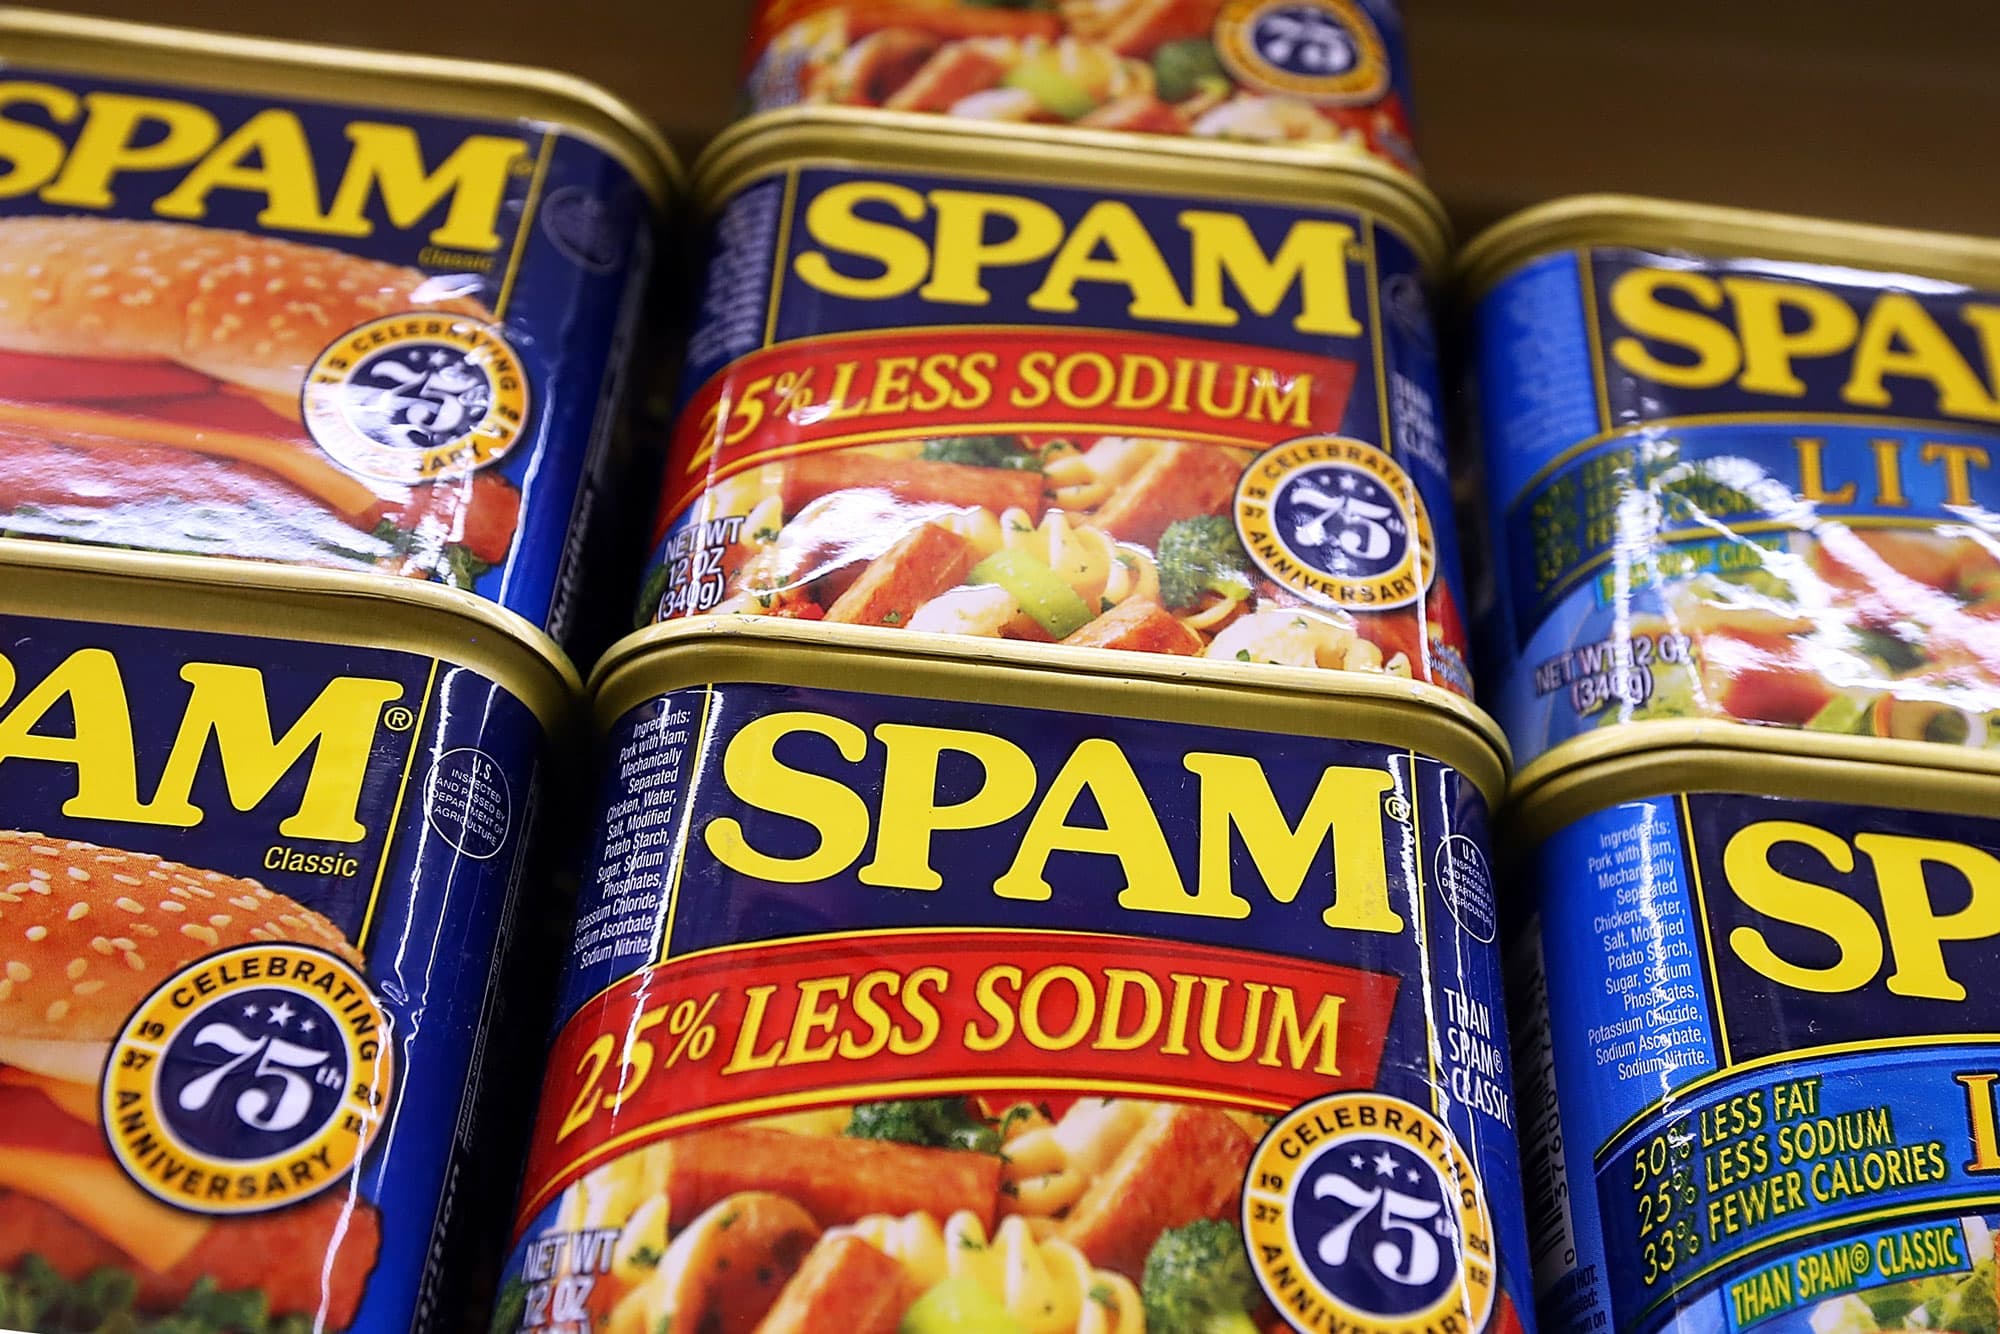 Spam sales reached a record high for the seventh year in a row in 2021, says CEO of Hormel Foods